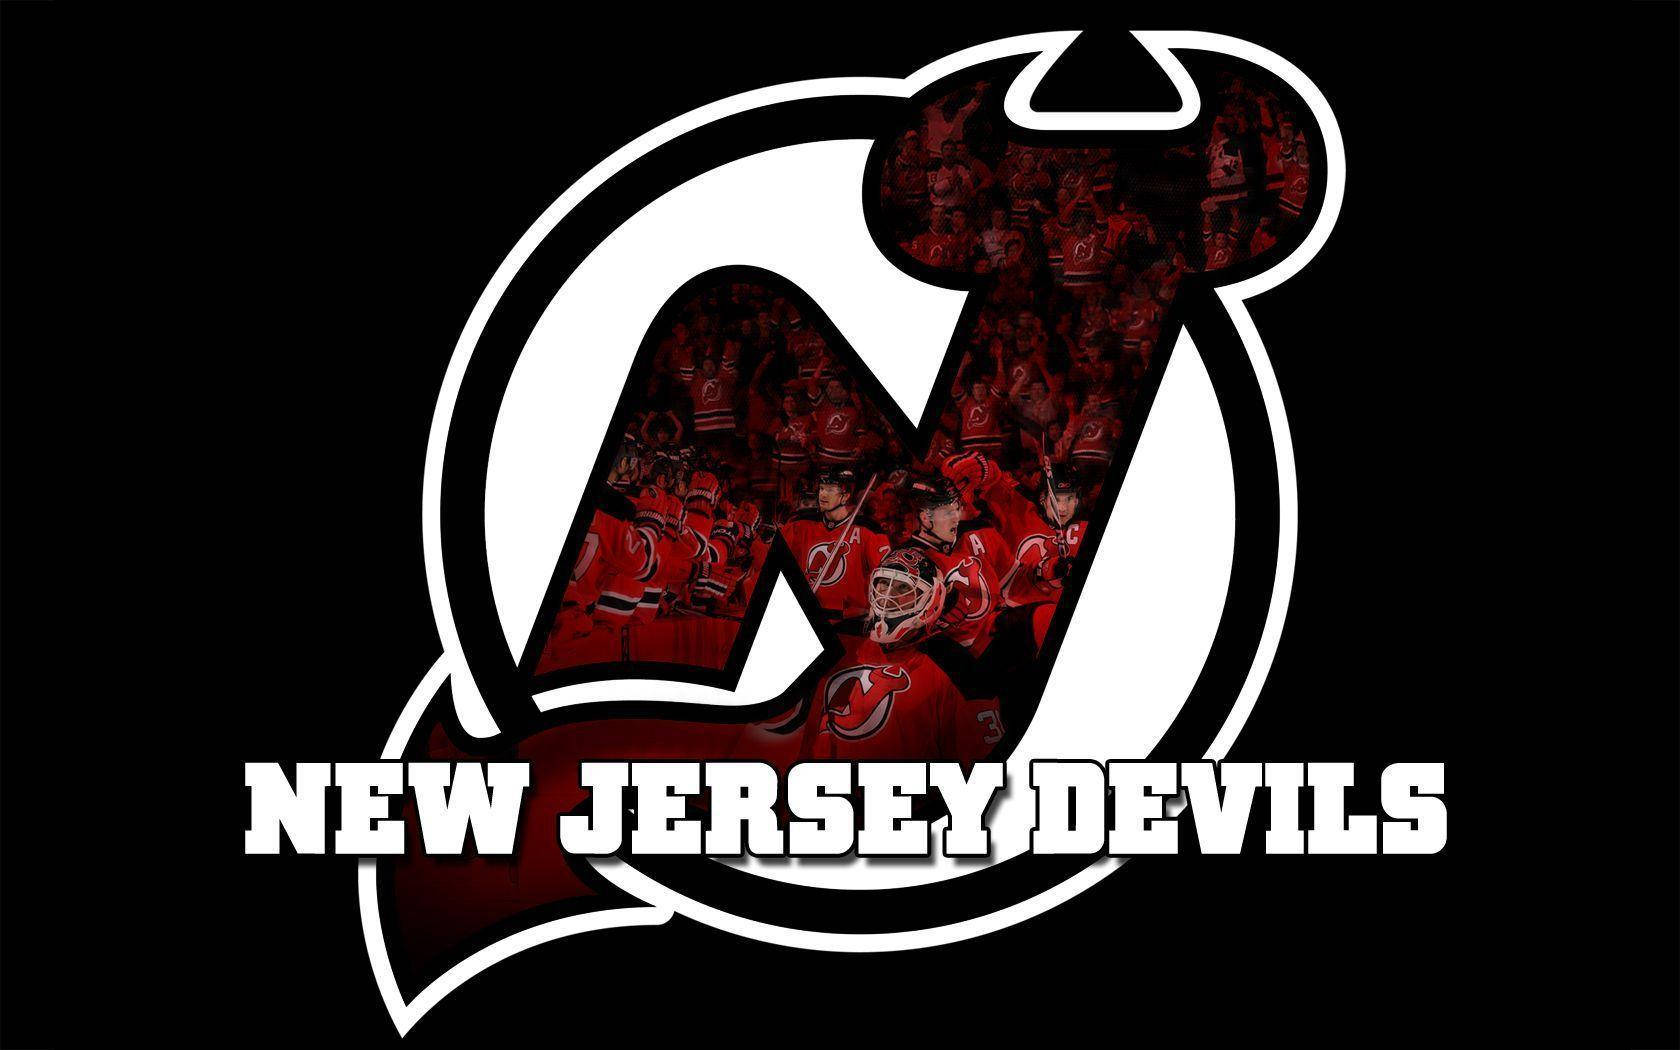 Community Event Hosted By The New Jersey Devils Background